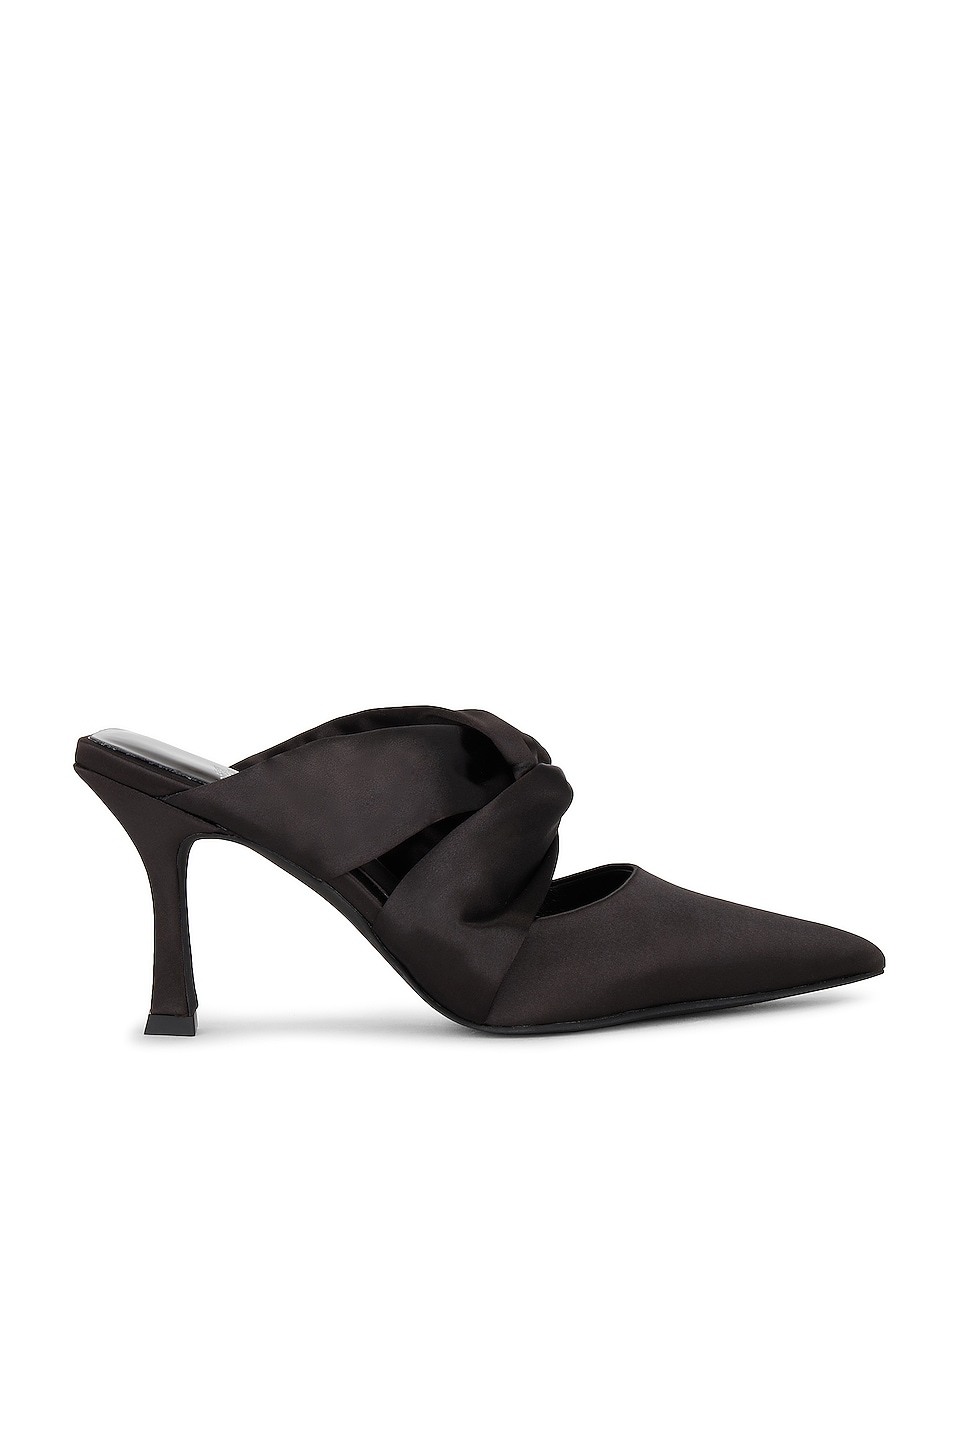 Jeffrey Campbell Tied Up Mule in Black Satin | REVOLVE